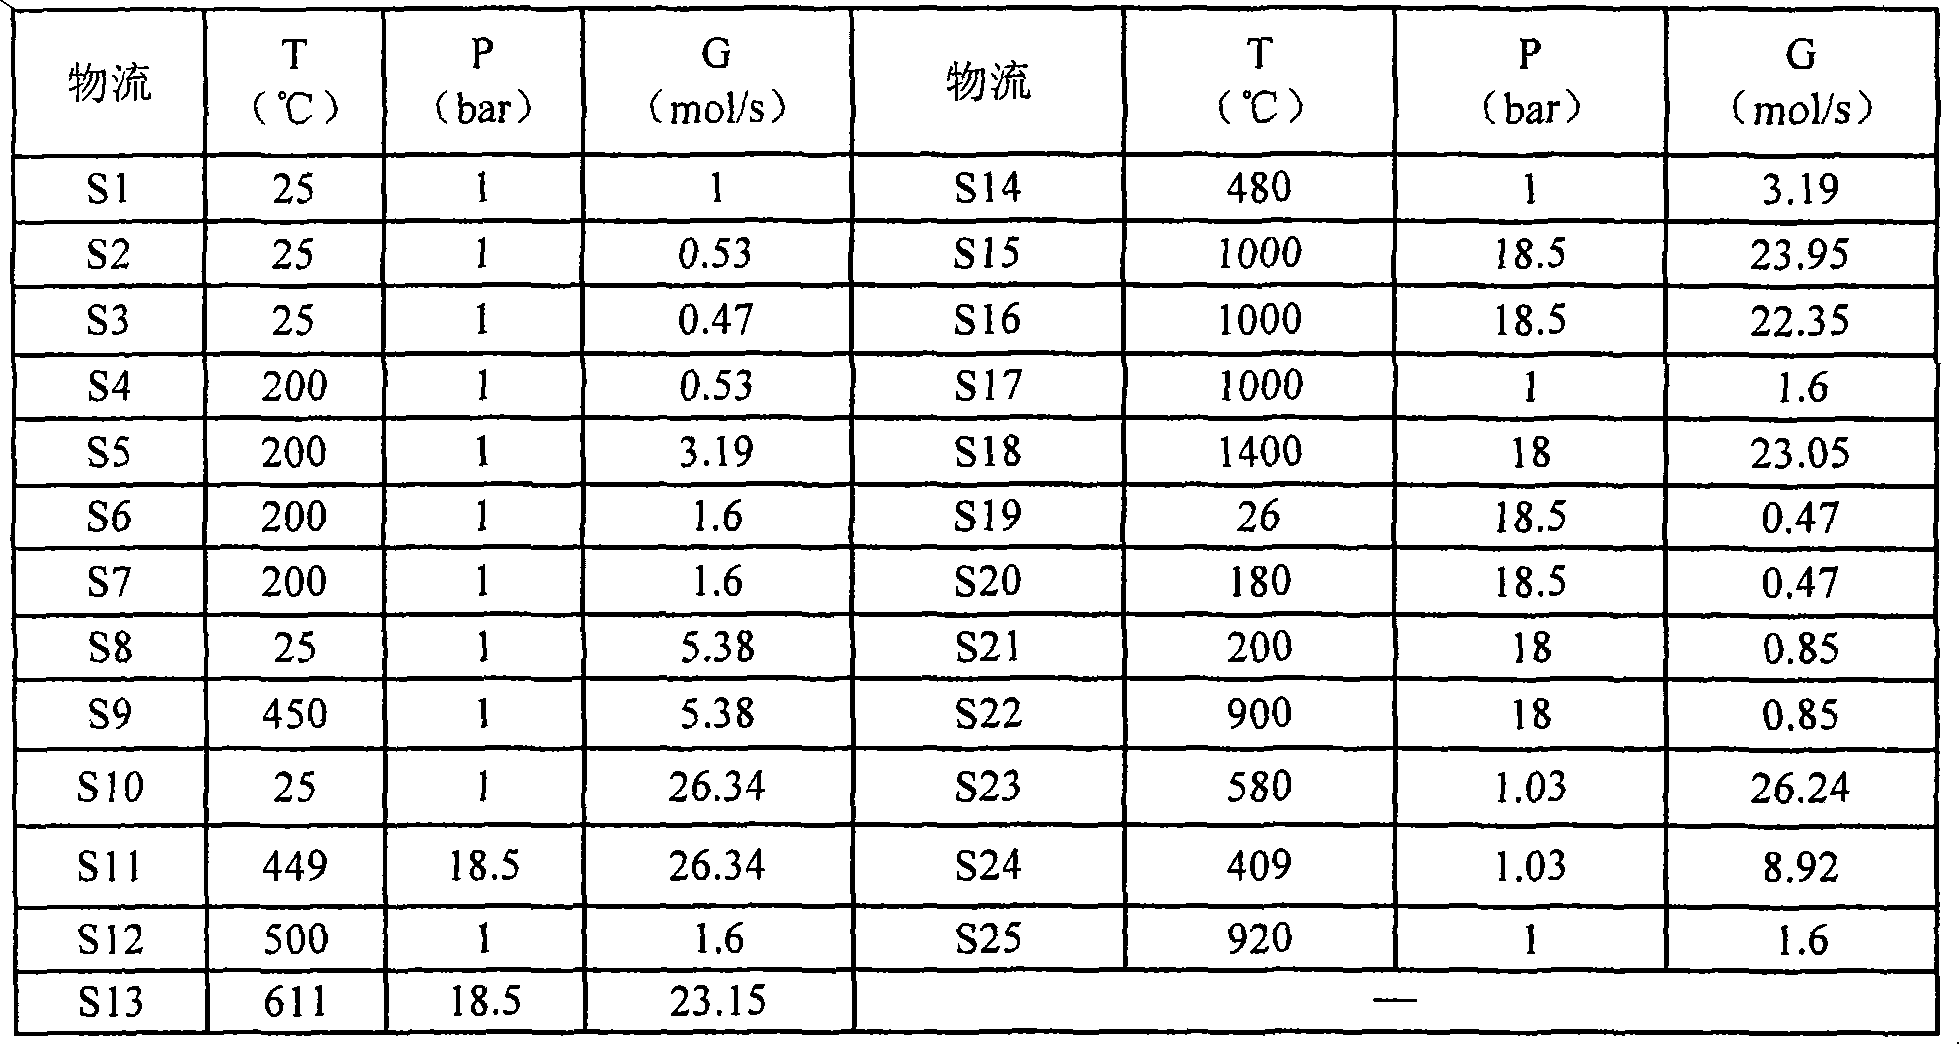 Solar energy and methanol fuel chemical-looping combustion power generation system and method